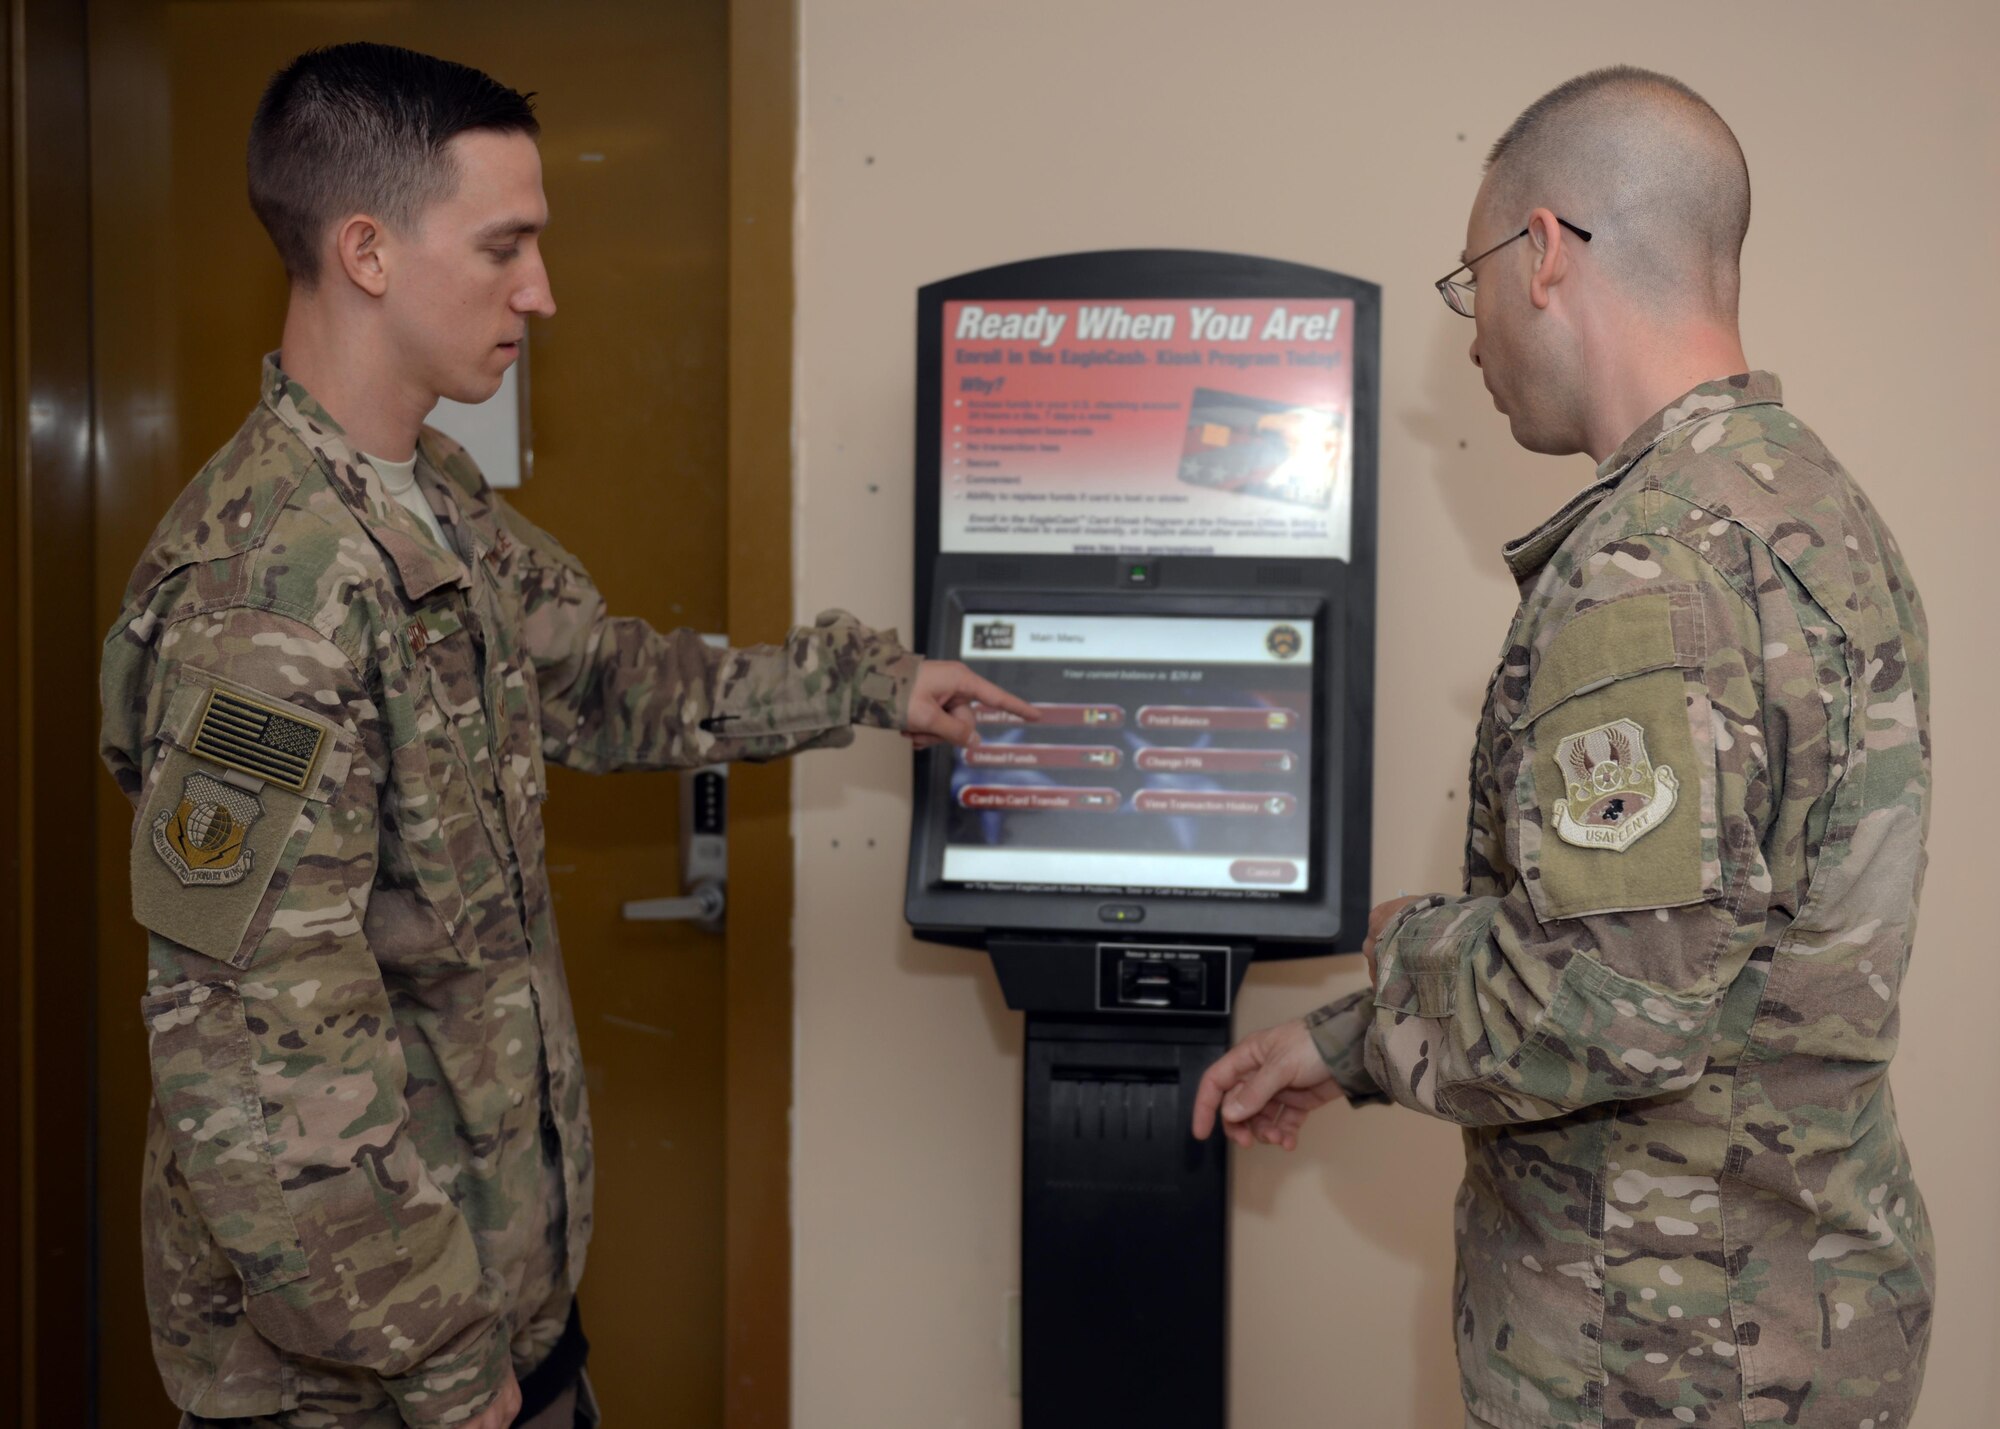 U.S. Air Force Senior Airman Corey Gibson, 455th Air Expeditionary Wing Finance Management customer service technician, assists a customer at an eagle cash card machine, June 24, 2015, at Bagram Airfield, Afghanistan. Gibson is the only finance customer service technician in Afghanistan and ensures all Bagram Active Duty, Reserve and Guard Airmen as well as U.S. civilian members are financially set during their deployment here. (U.S. Air Force photo by Senior Airman Corey Gibson/Released)